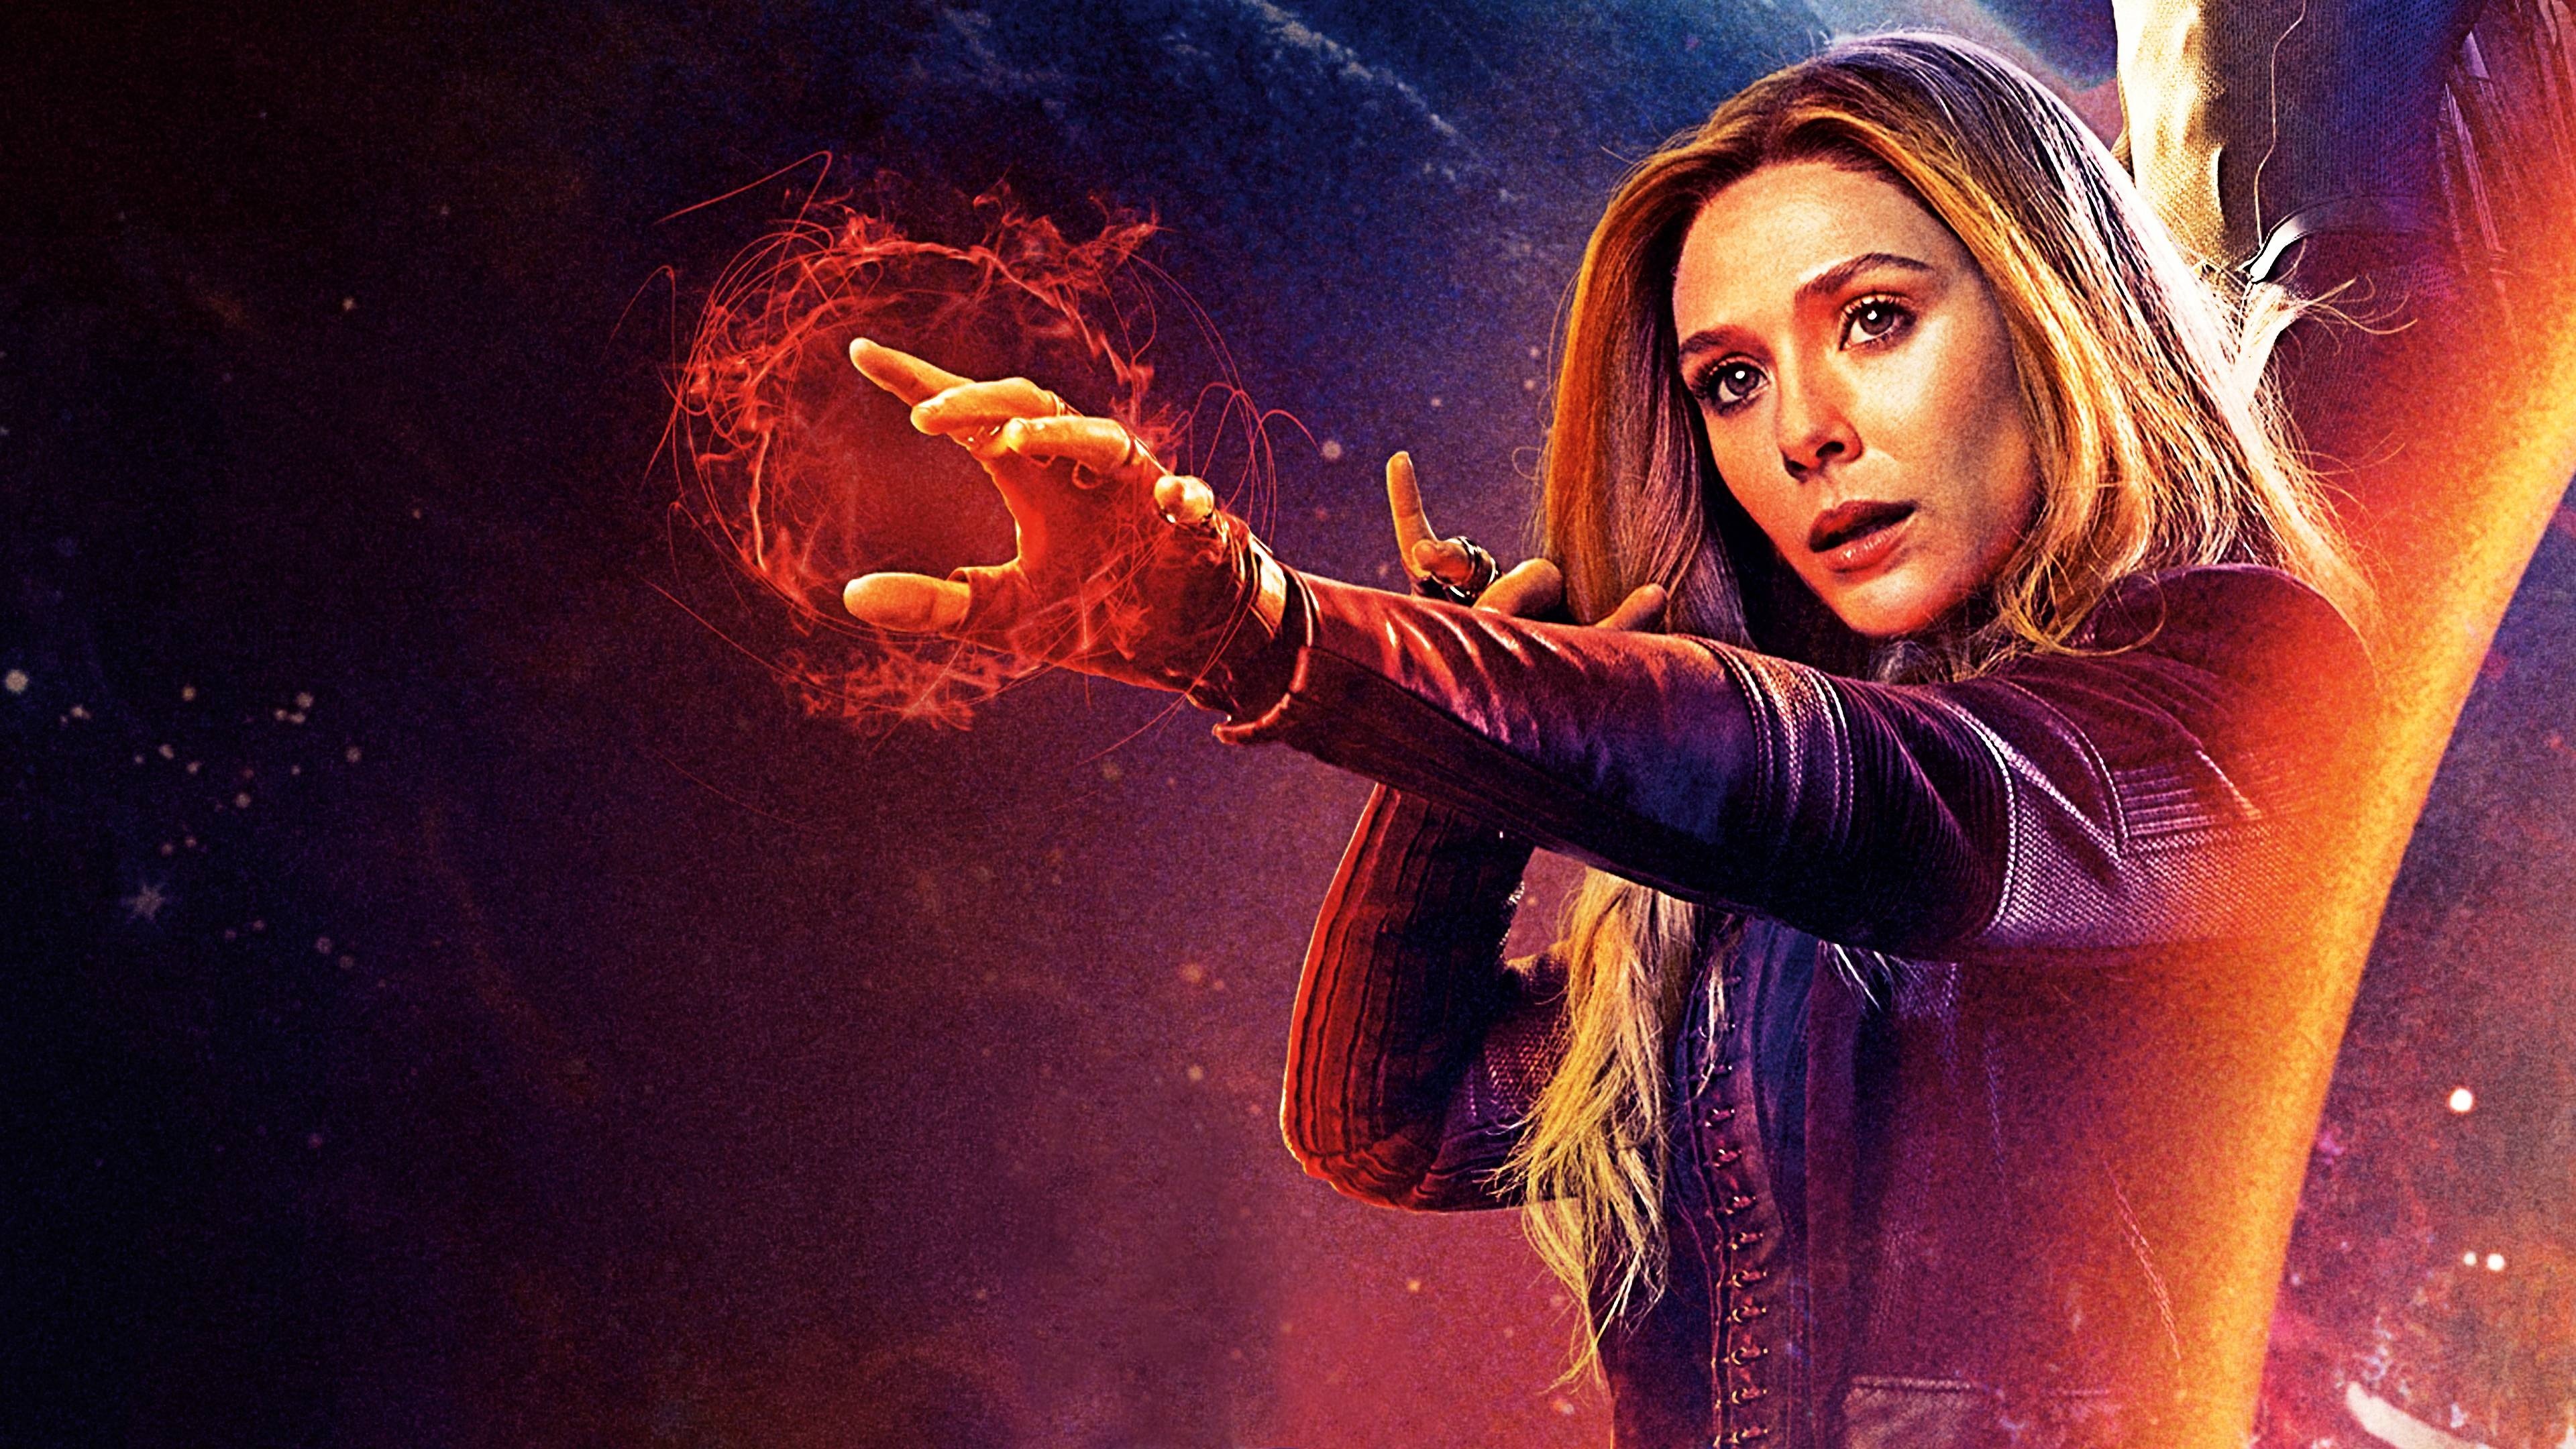 Scarlet Witch, Scarlet Witch in Infinity War, Dynamic backgrounds, Action-packed scenes, 3840x2160 4K Desktop